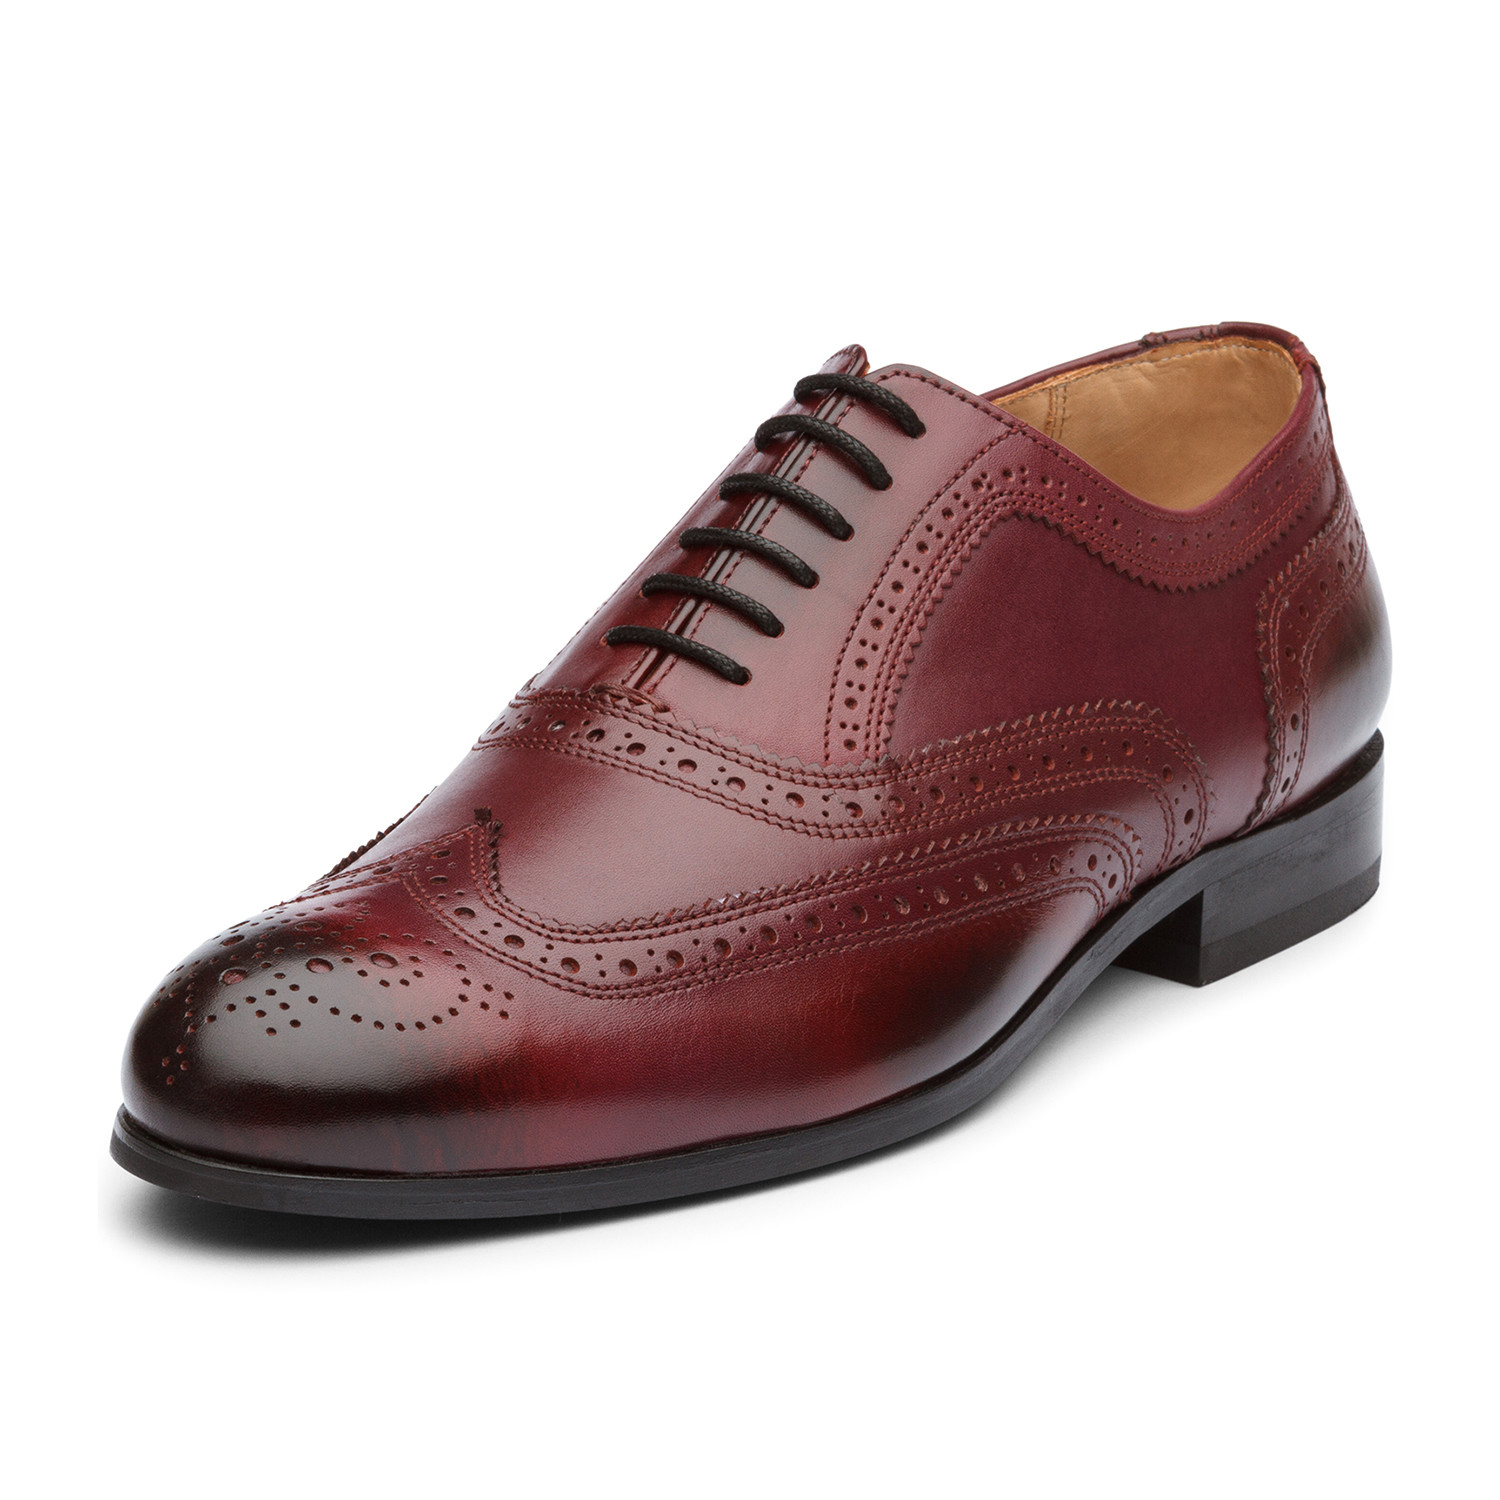 Nathan Oxford Leather Lined Shoes // Burgundy (UK: 6) - Dapper Shoe Co ...